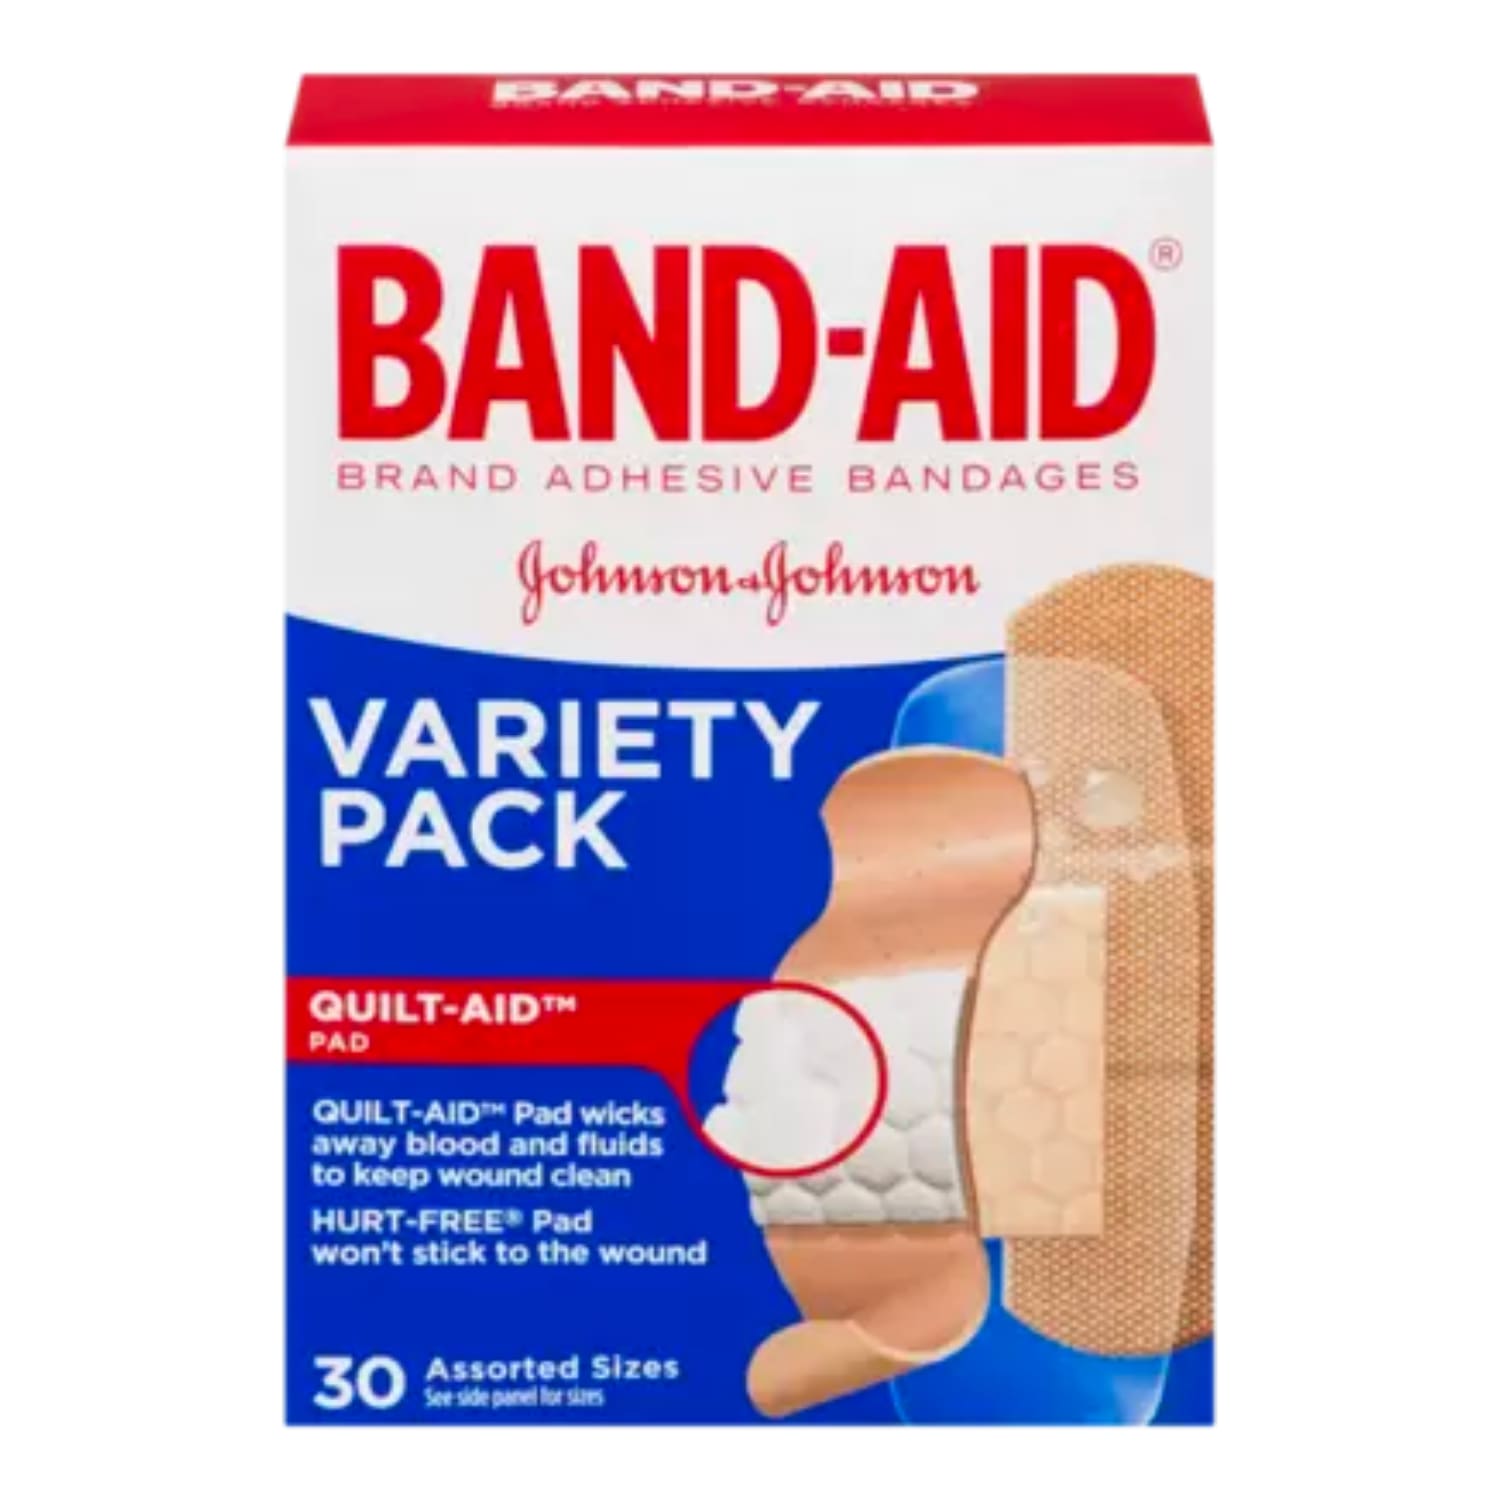 https://medaki.mo.cloudinary.net/static/products/band-aid-adhesive-bandages-family-variety-pack-30-count.webp